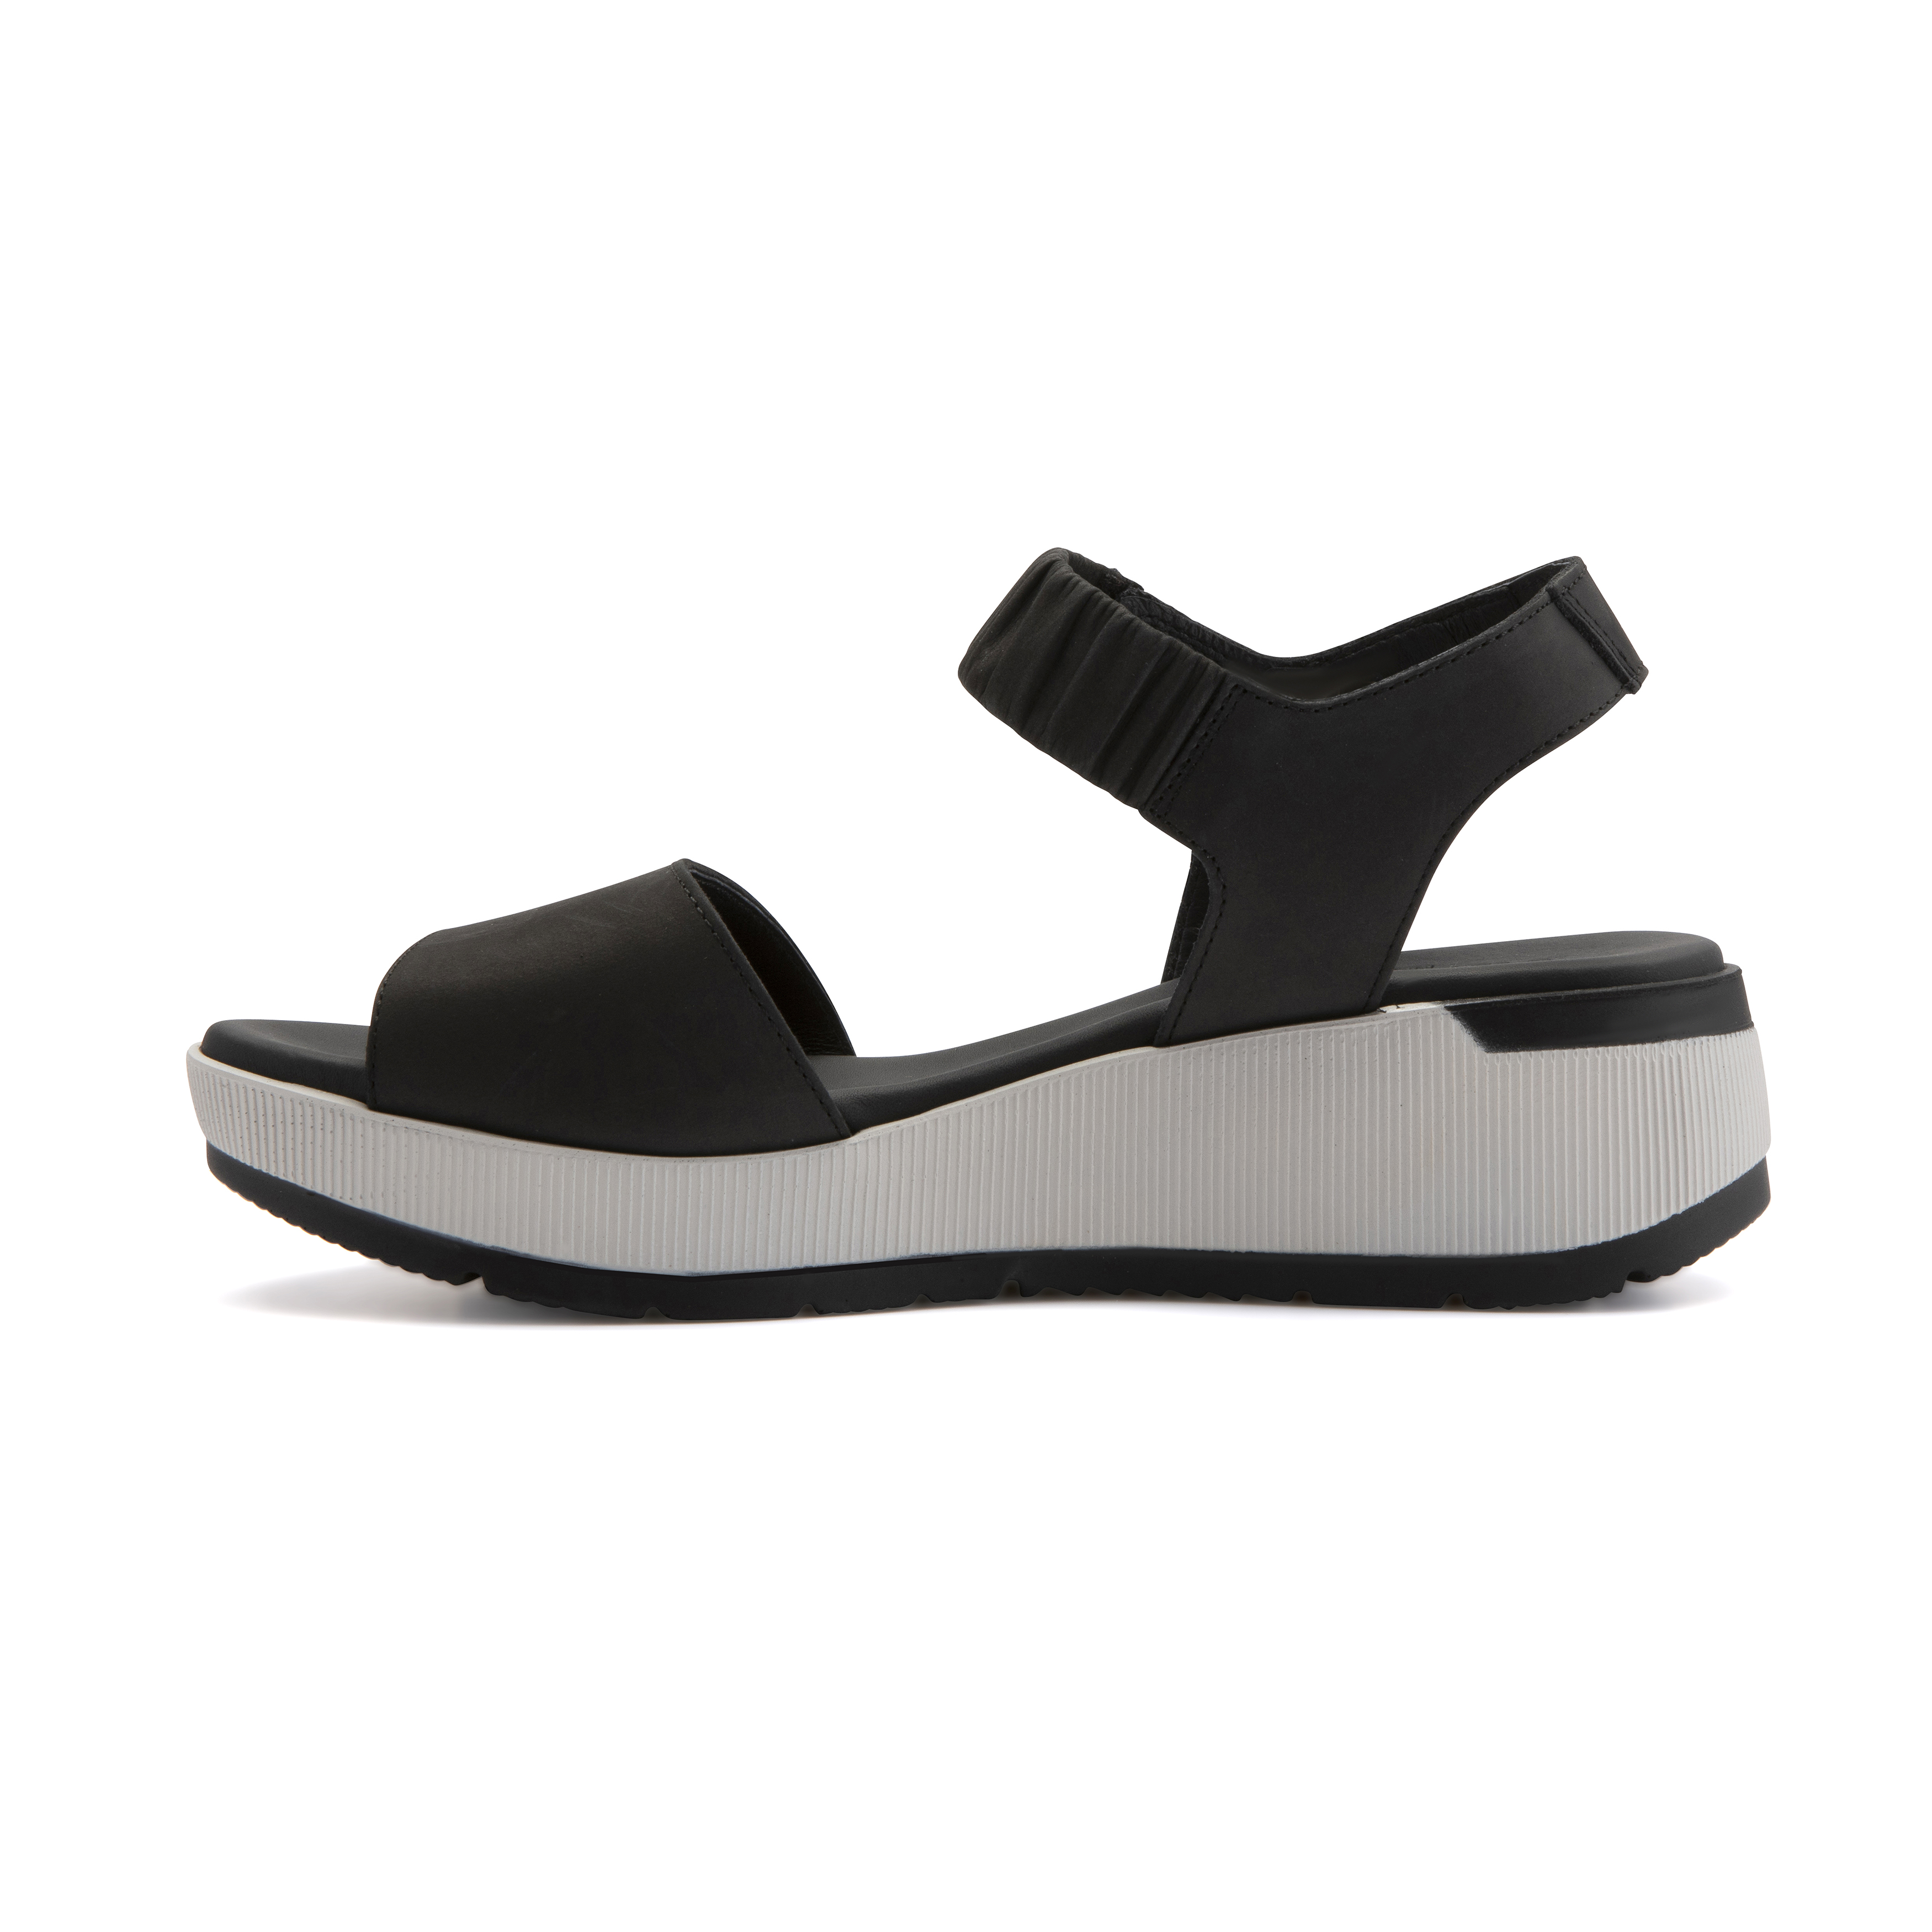 PAULA URBAN BLACK LEATHER LOW SPORTY WEDGES | Rosella - Style inspired ...